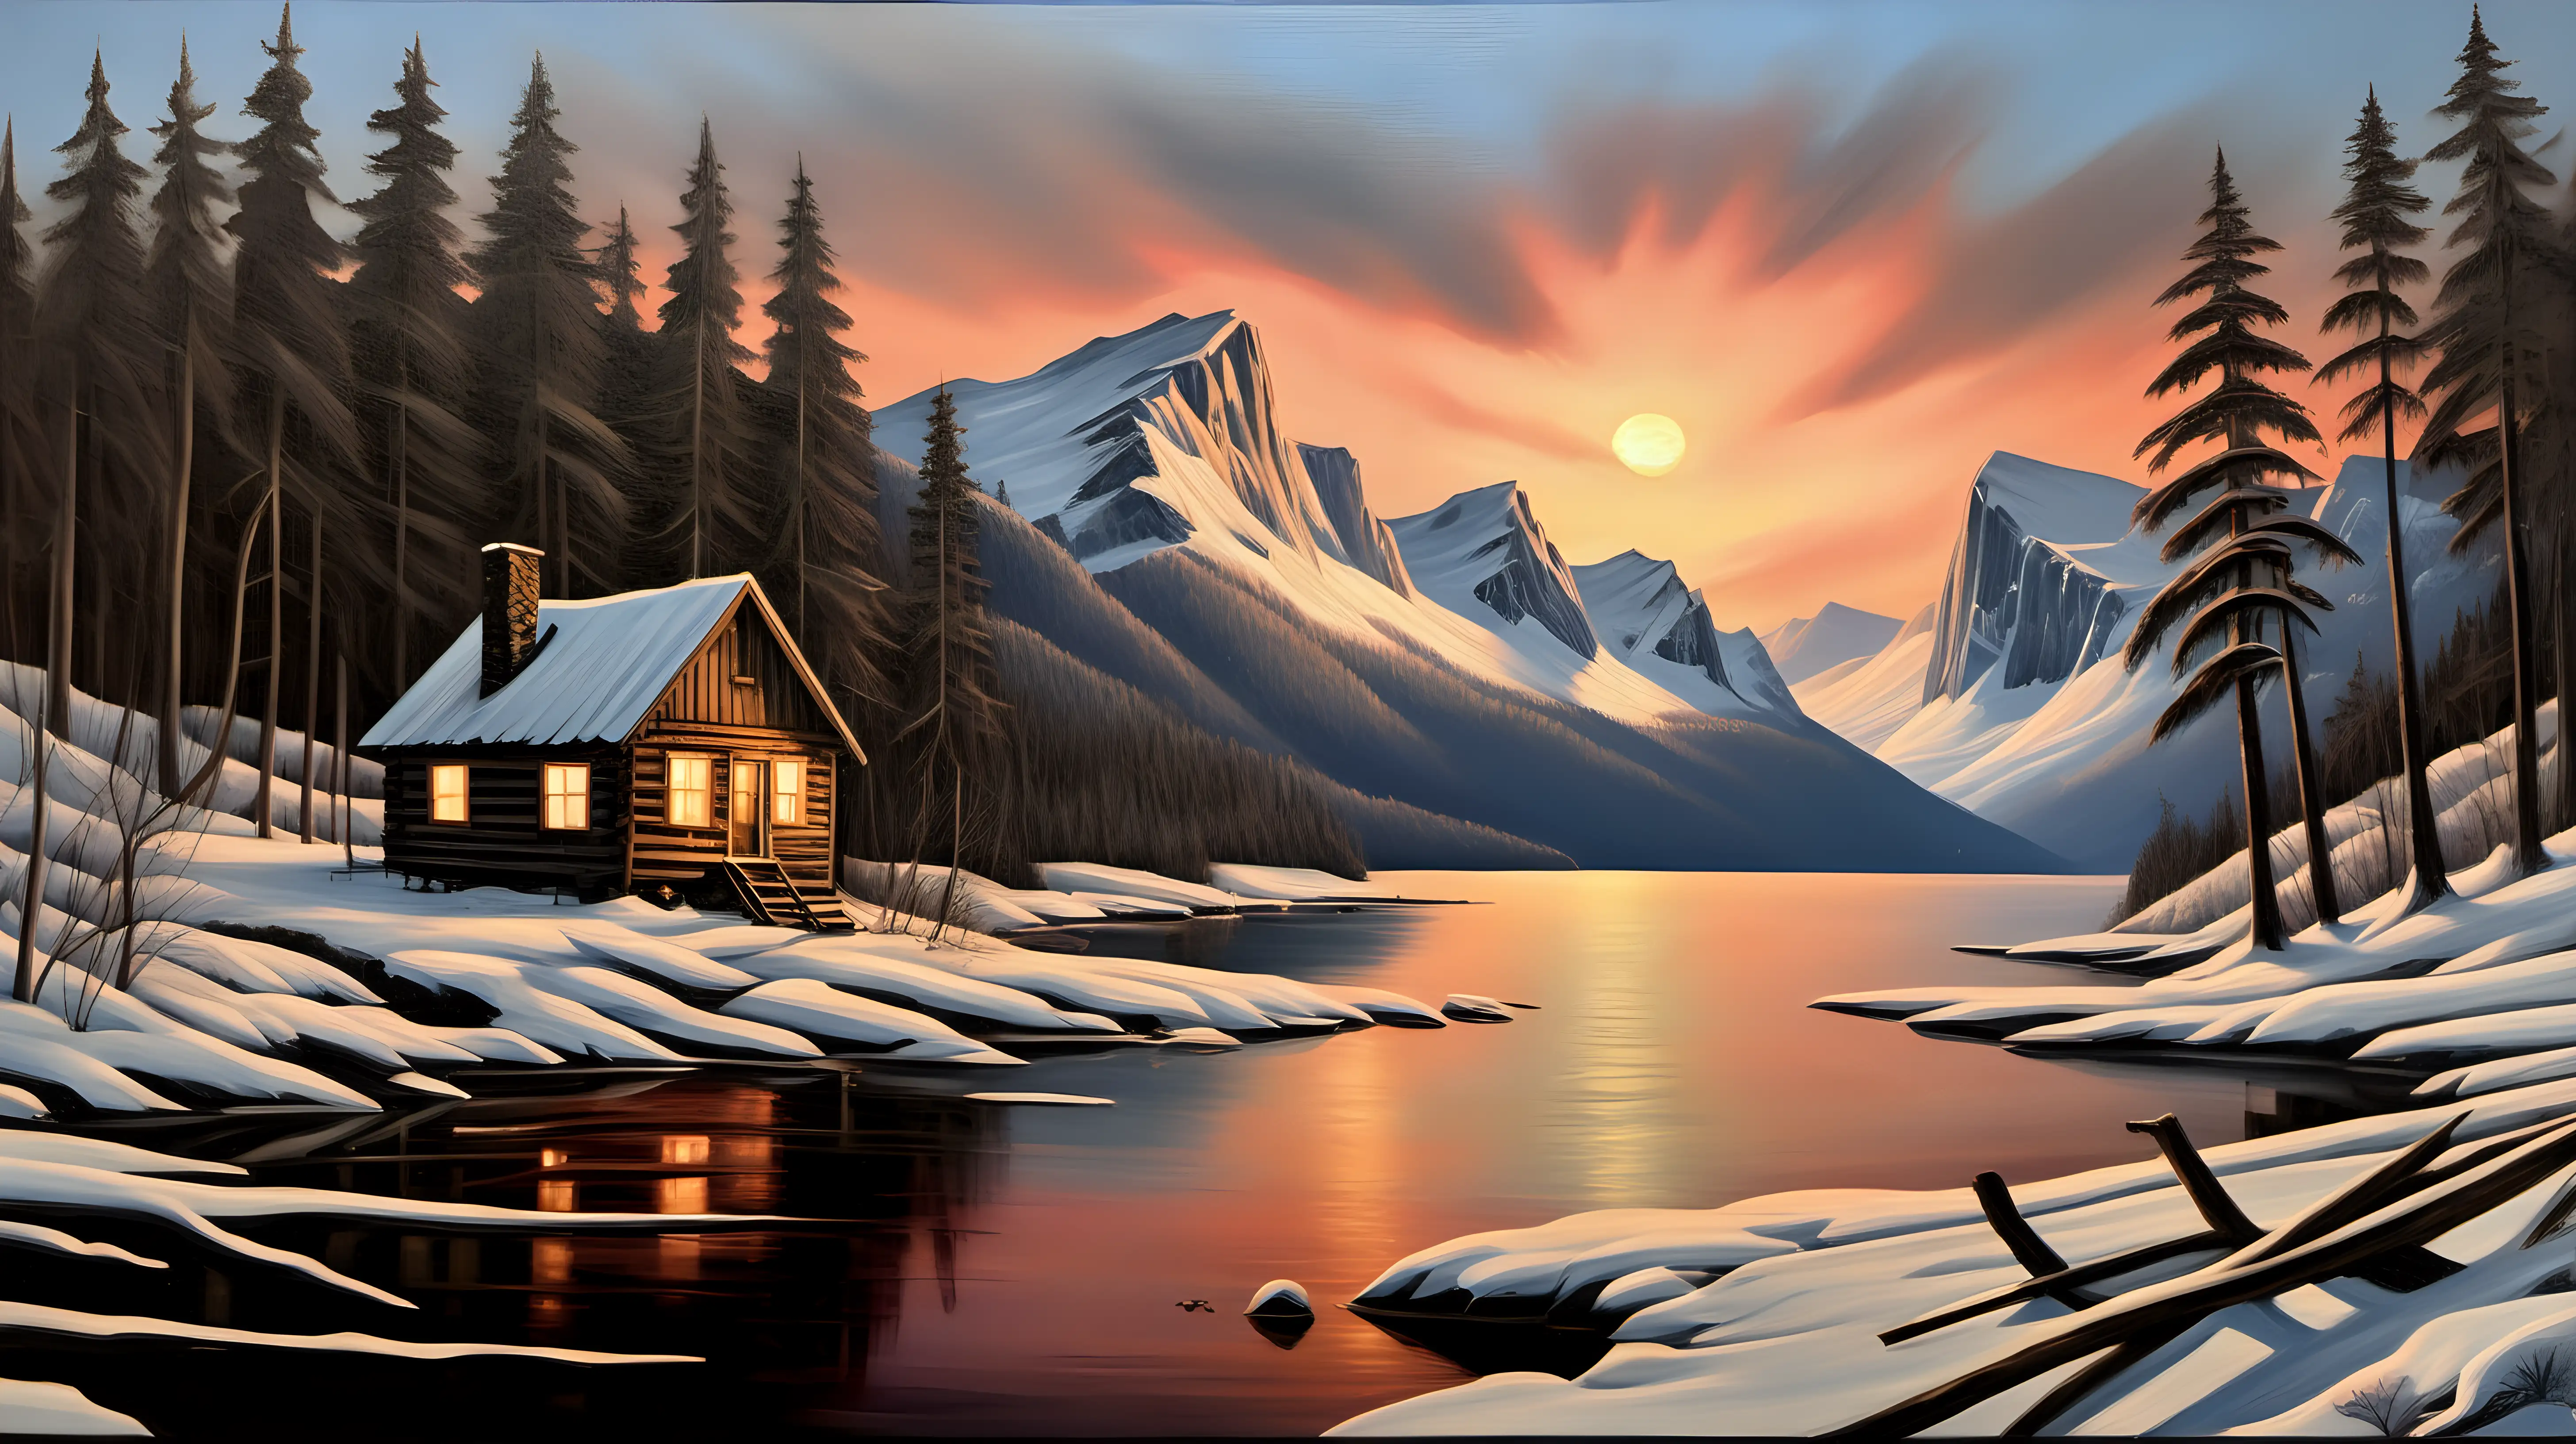 OIL PAINTING OF  OLD CABIN  IN BAY, SNOW, WINTER,  HEAVY WOODS,   SUNSET, NO CLOUDS, WEEDS,     MOUNTAINS, FOREST, TREES